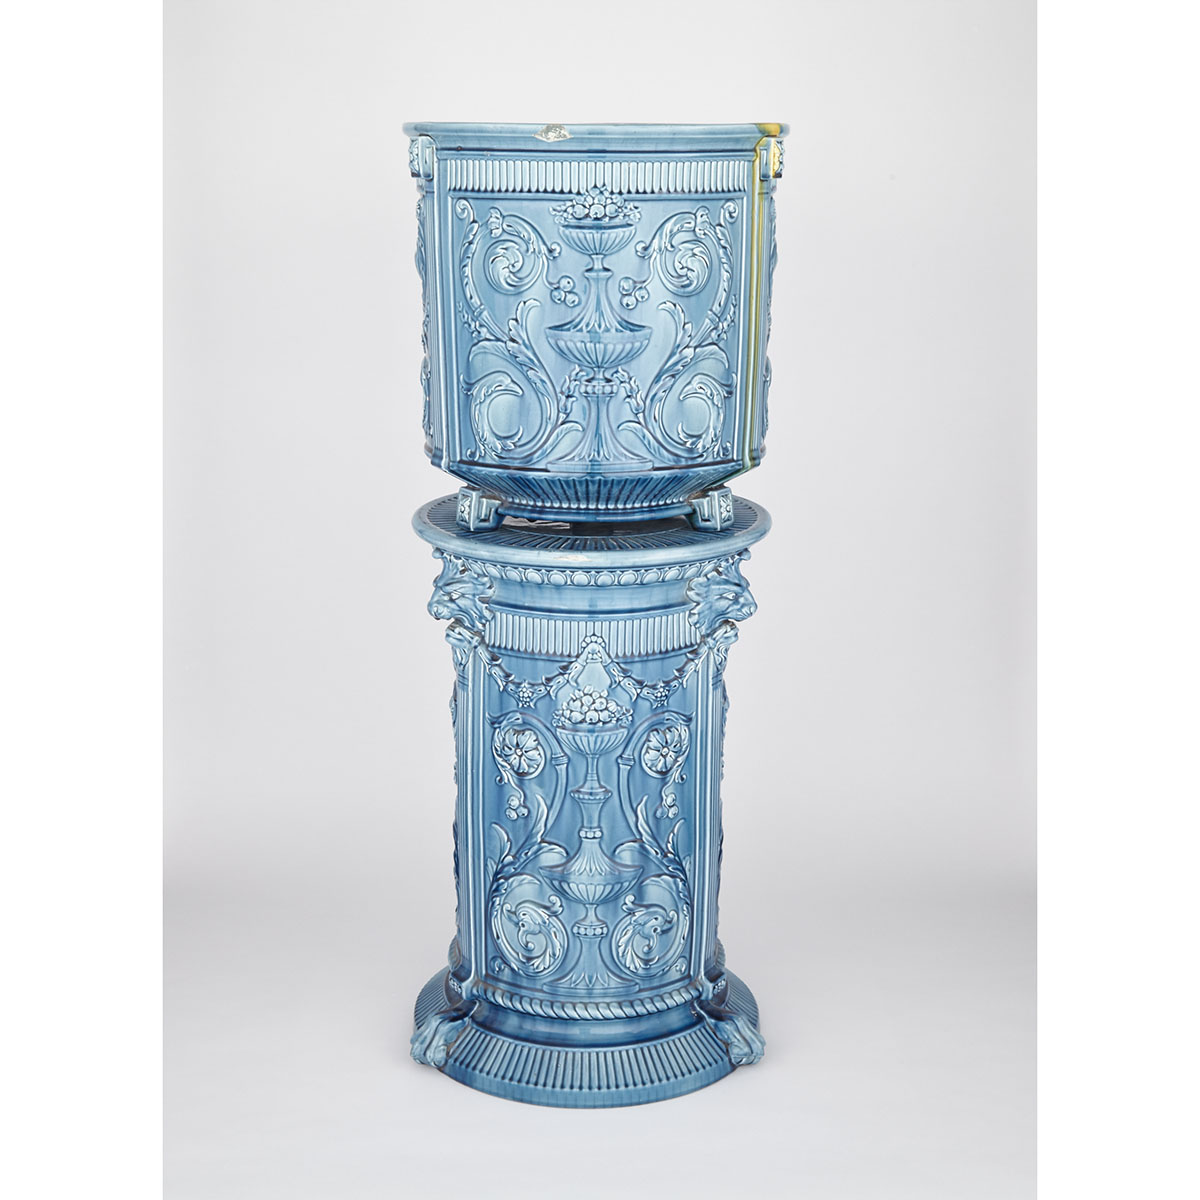 Wedgwood Jardinière and Stand, c.1889-90